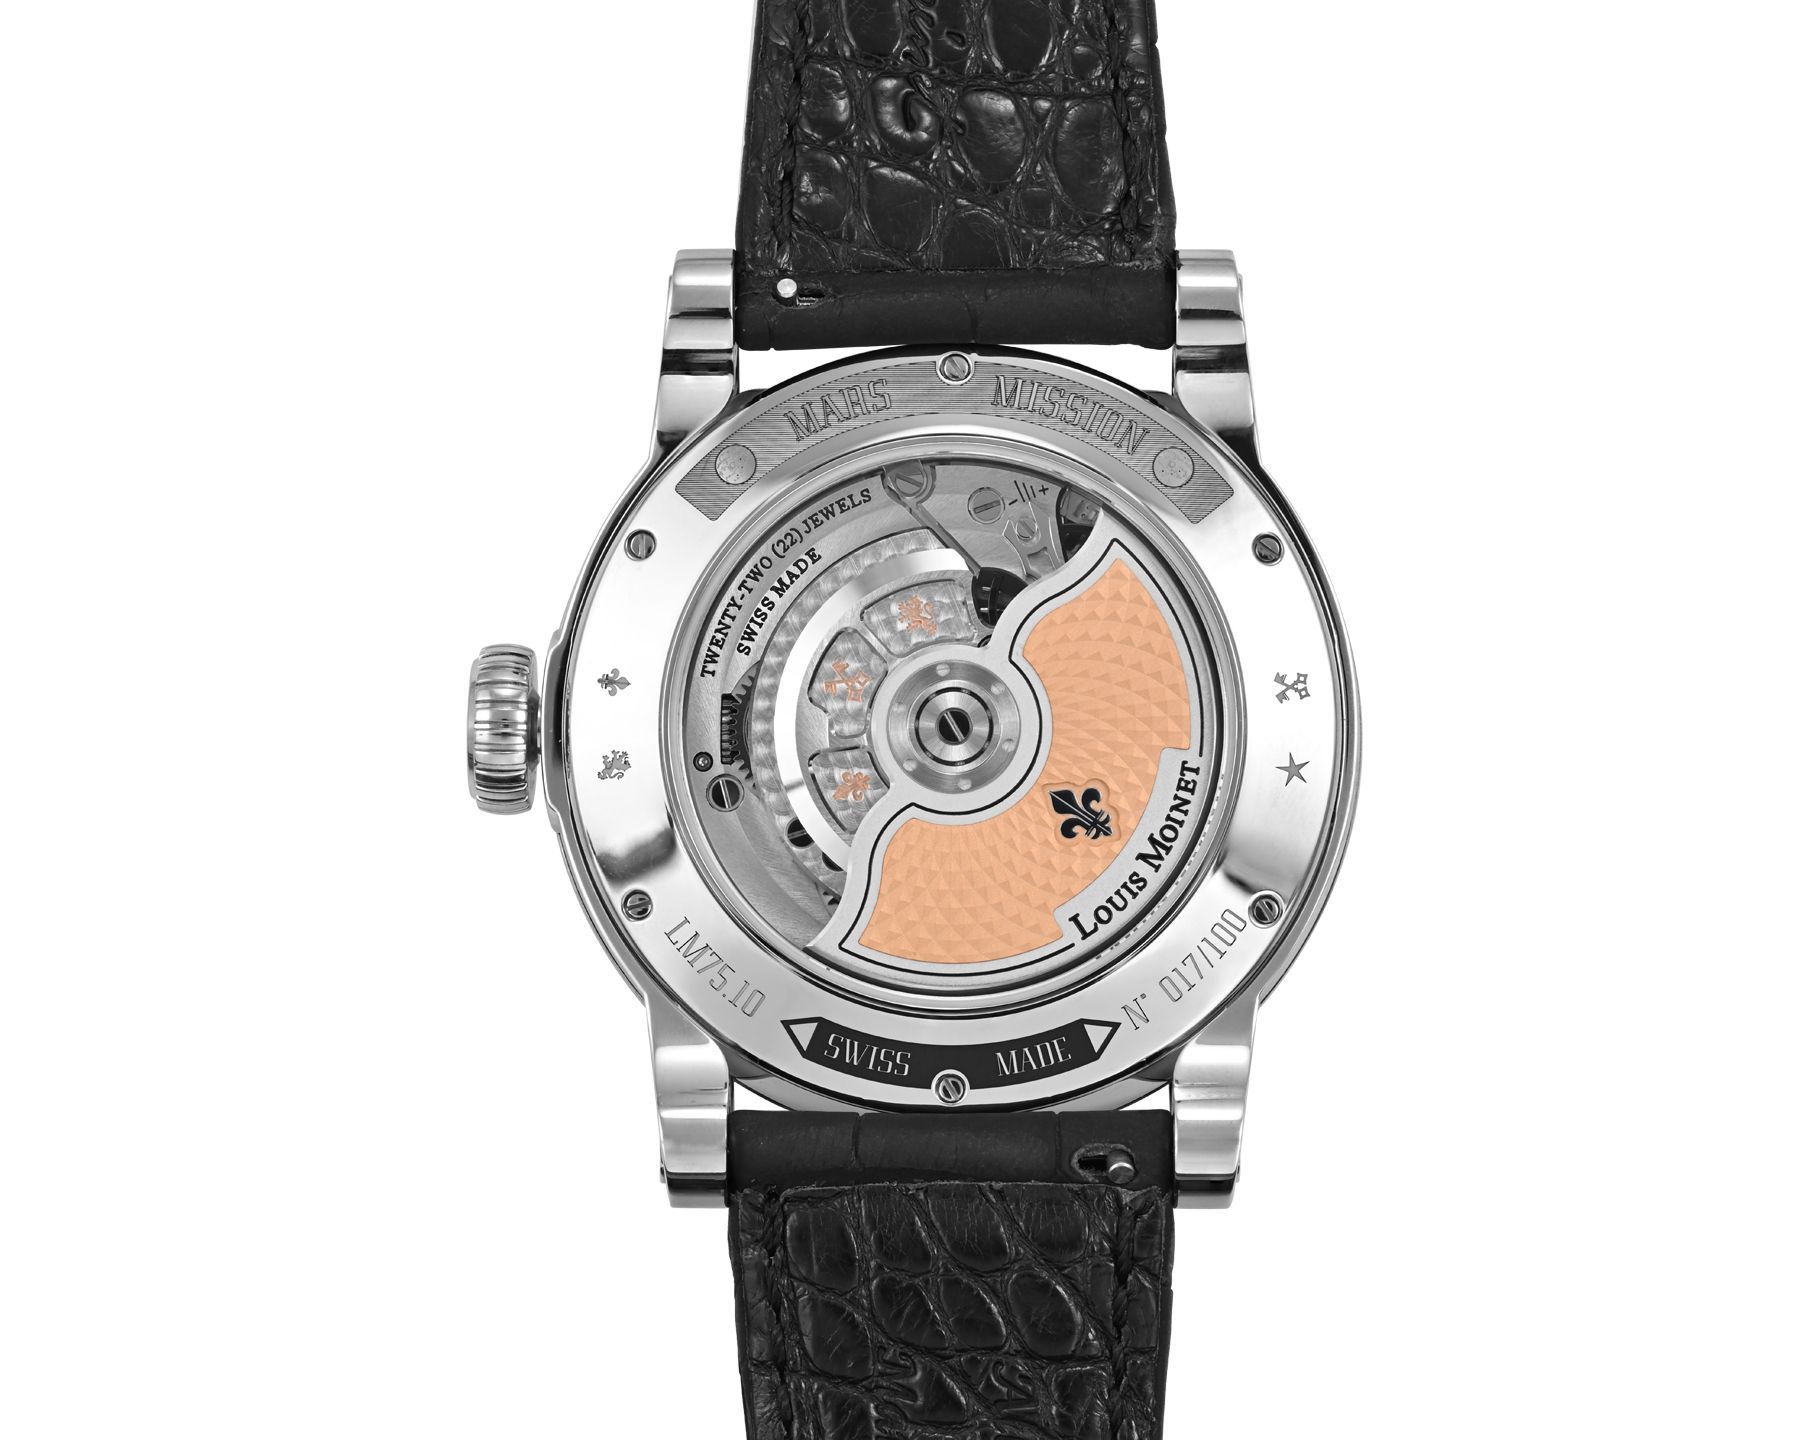 Louis Moinet Mars Mission – LM-75.10.MA-C – 20,490 USD – The Watch Pages